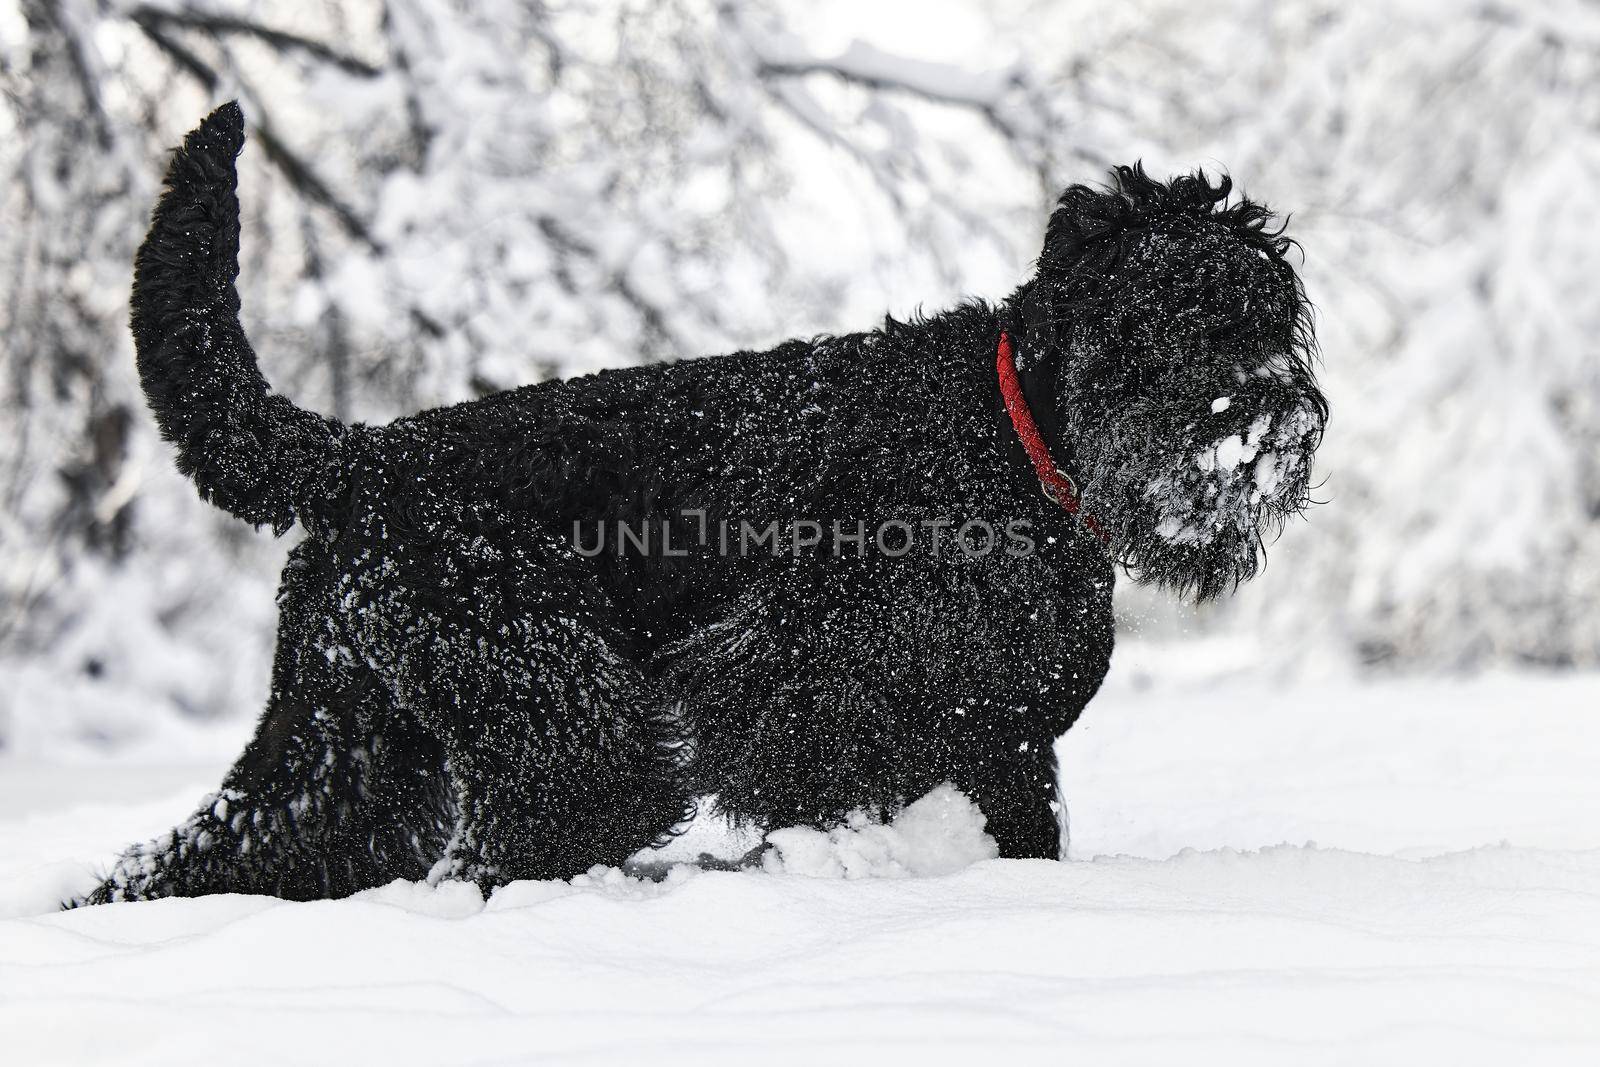 Happy black long-haired dog in the snow. The big dog is glad of the snow. A black dog in the snow. Russian black terrier walking in a snowy park. What happens if you walk your dog in winter.